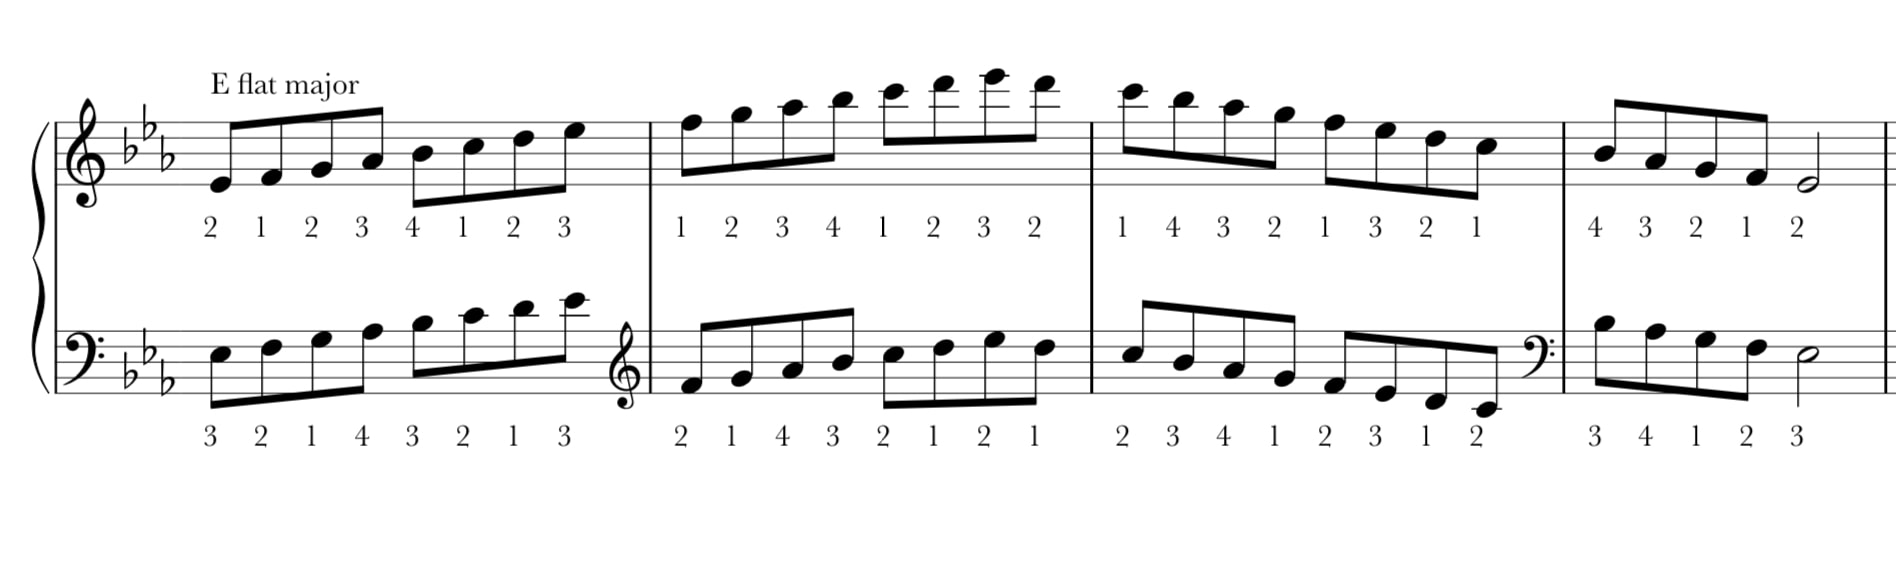 Notation for E flat major scale on piano